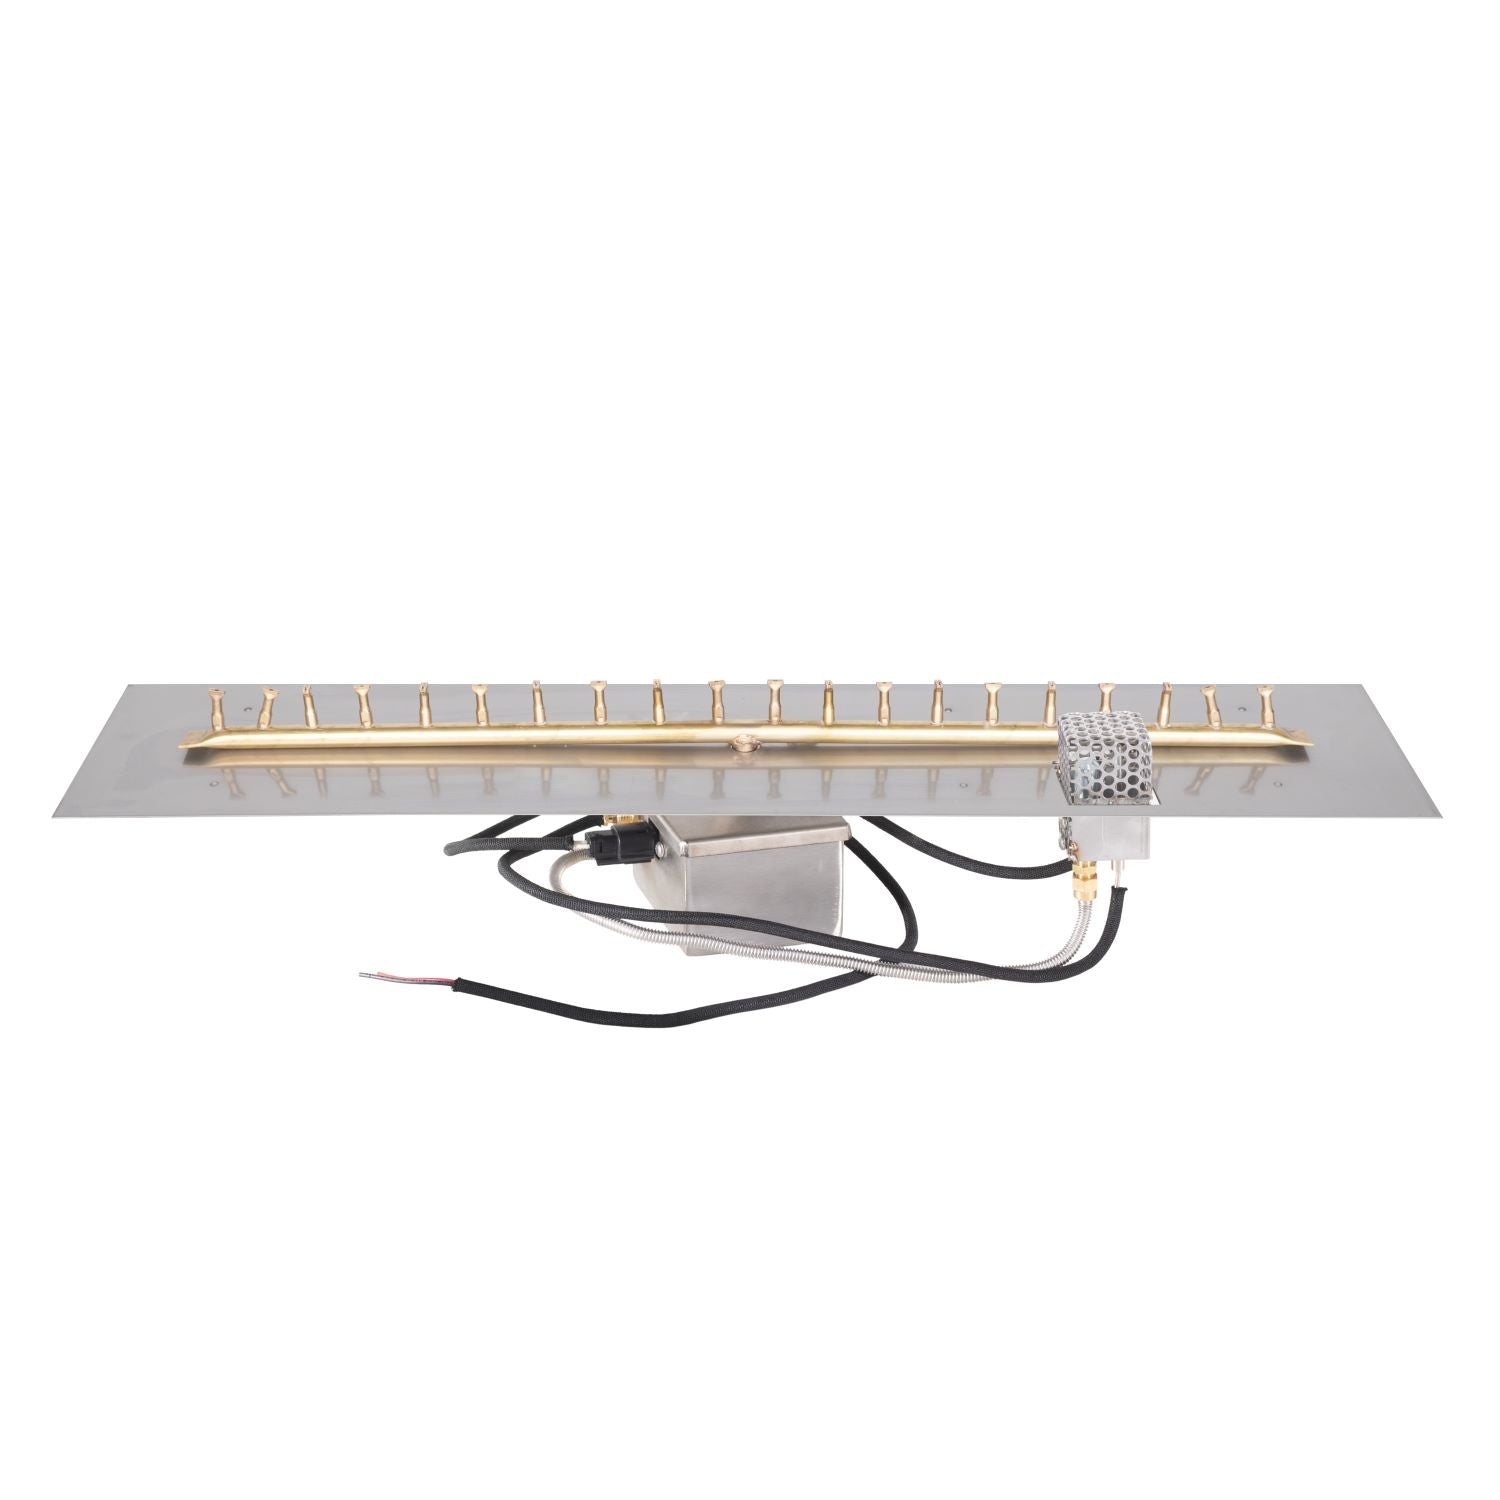 The Outdoor Plus Rectangular Flat Pan with Brass Linear Triple 'S' Bullet Burner